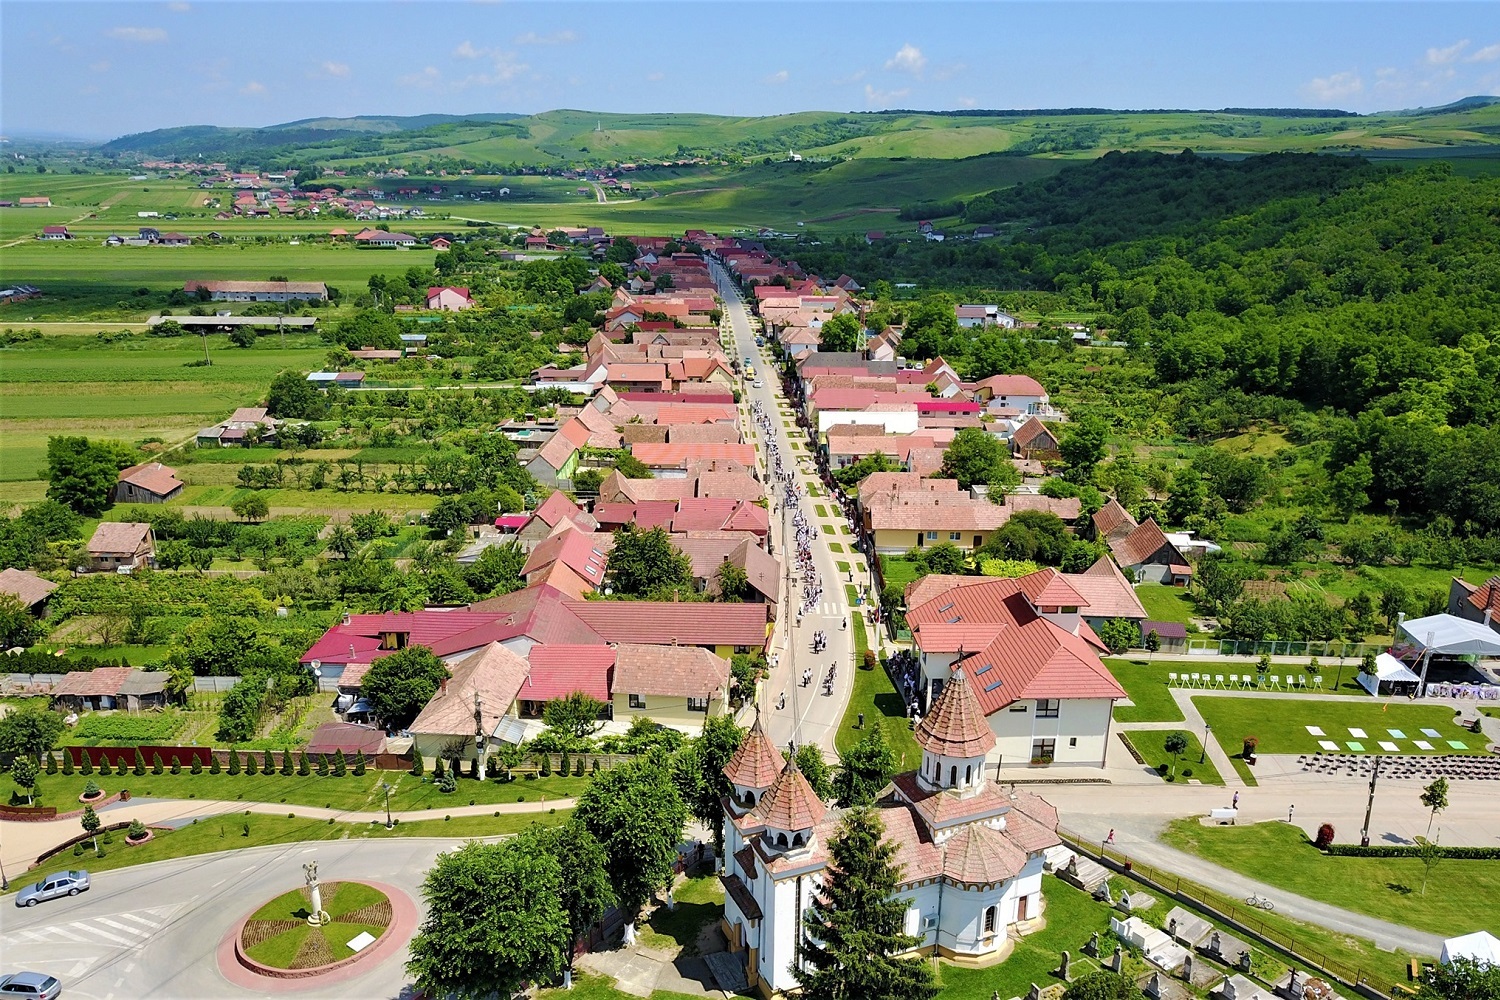 The municipality of Vorokhta partnered with the Romanian commune of Ciugud